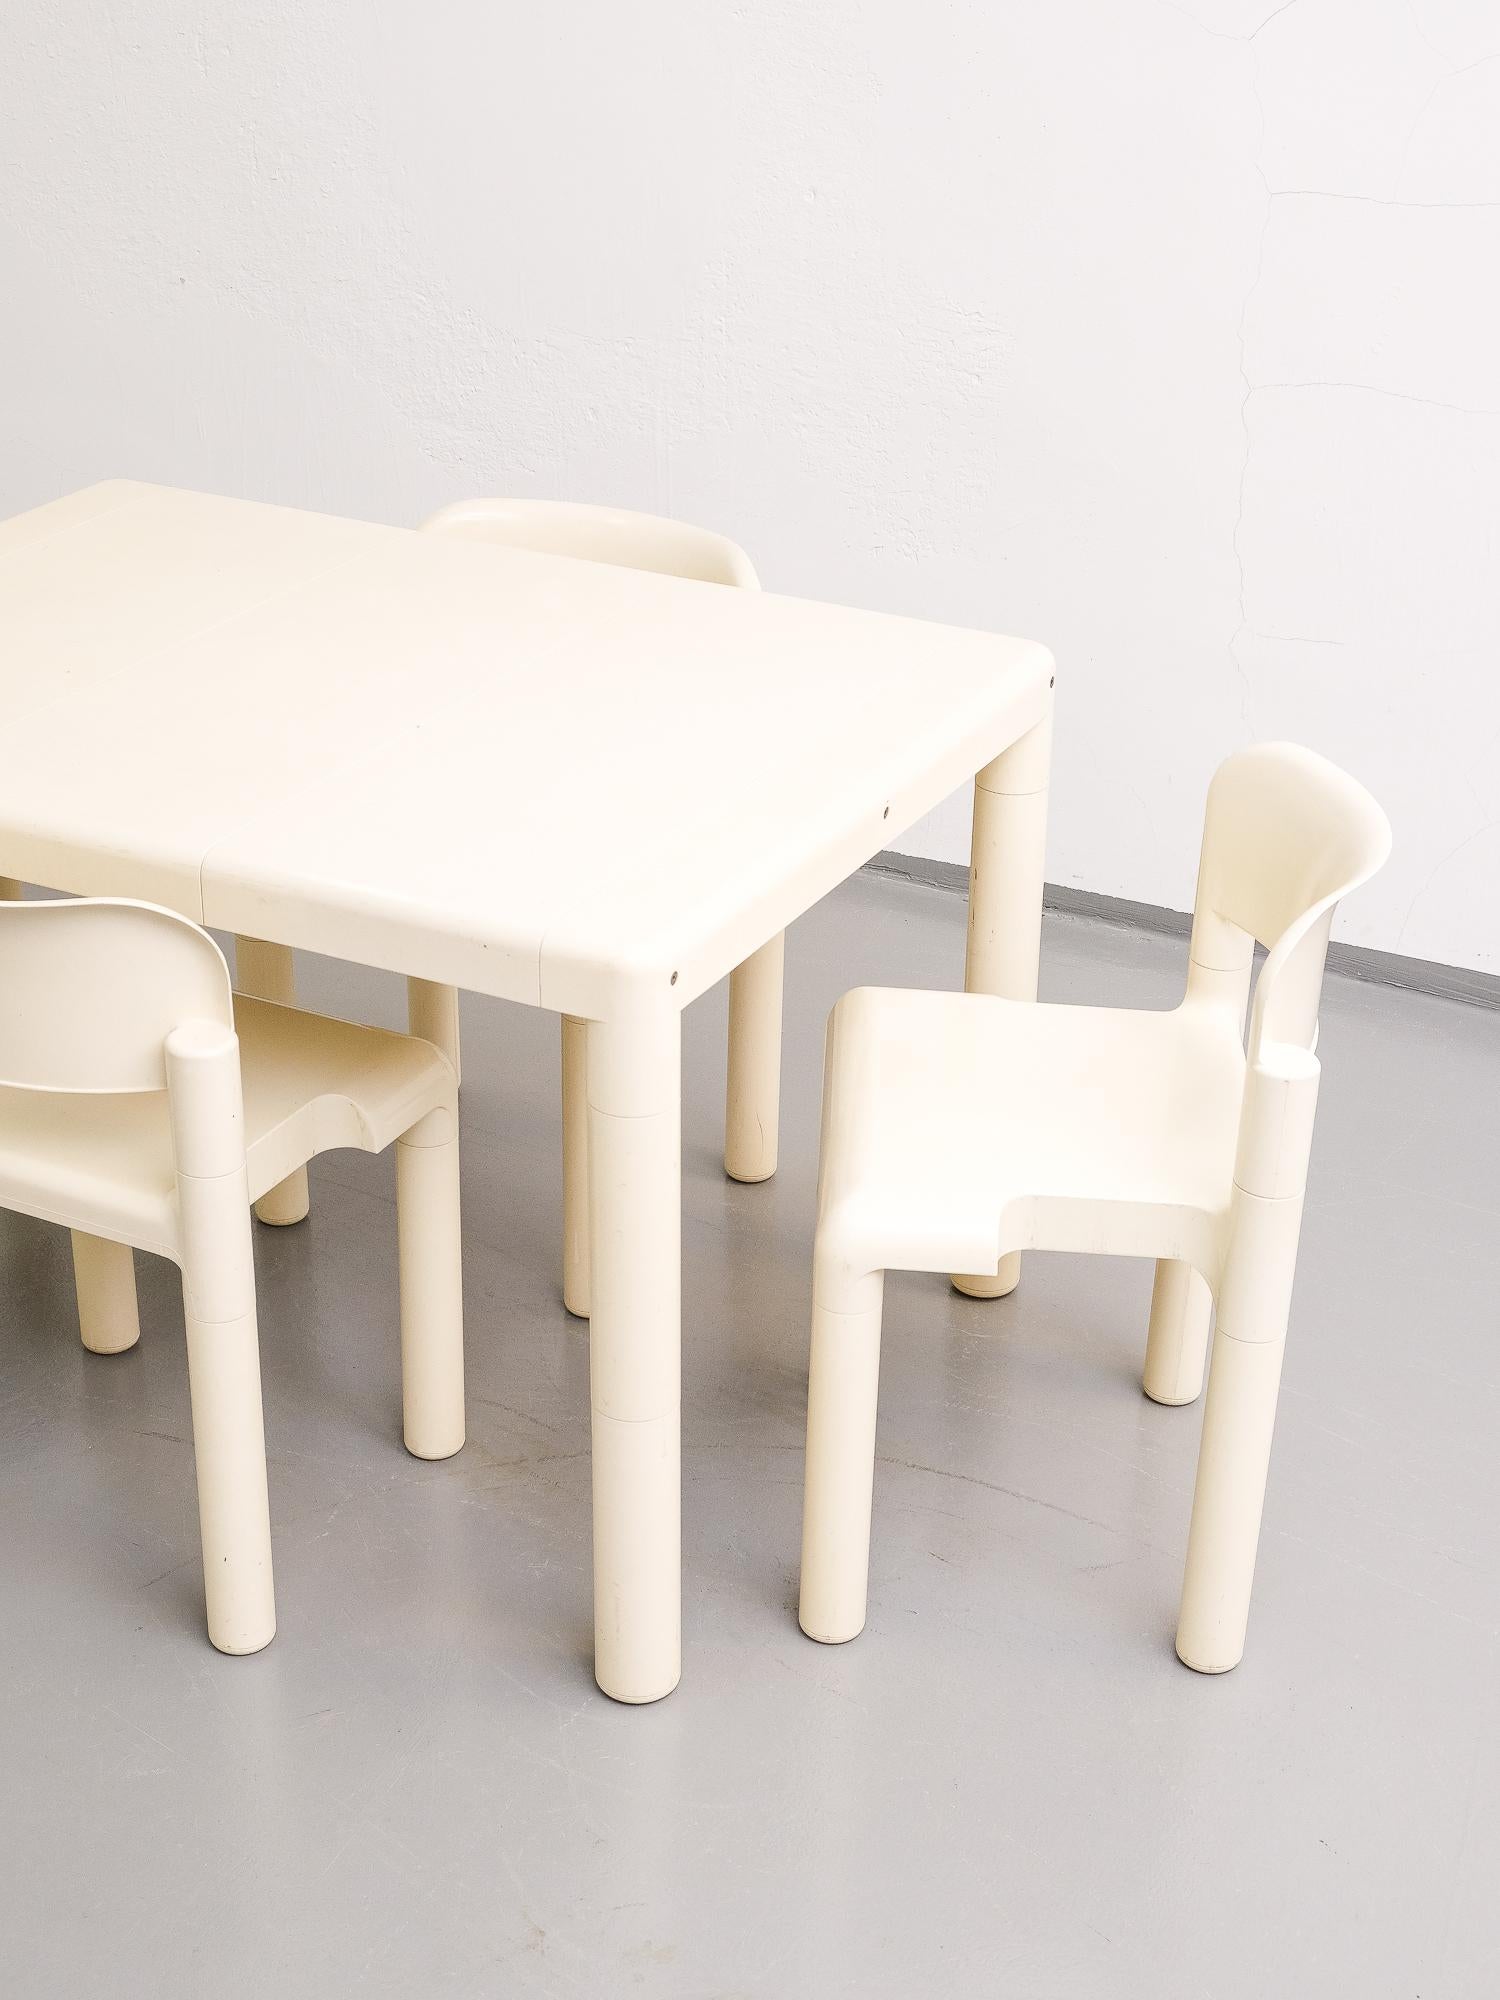 The rare set of 4 stacking chairs with the matching table designed by Eero Aarnio for Upo Furniture, 1970s.
White plastic, metal crossbars beneath the table top to make it sturdy.
The chairs have patina of age. Some signs of use.

Table